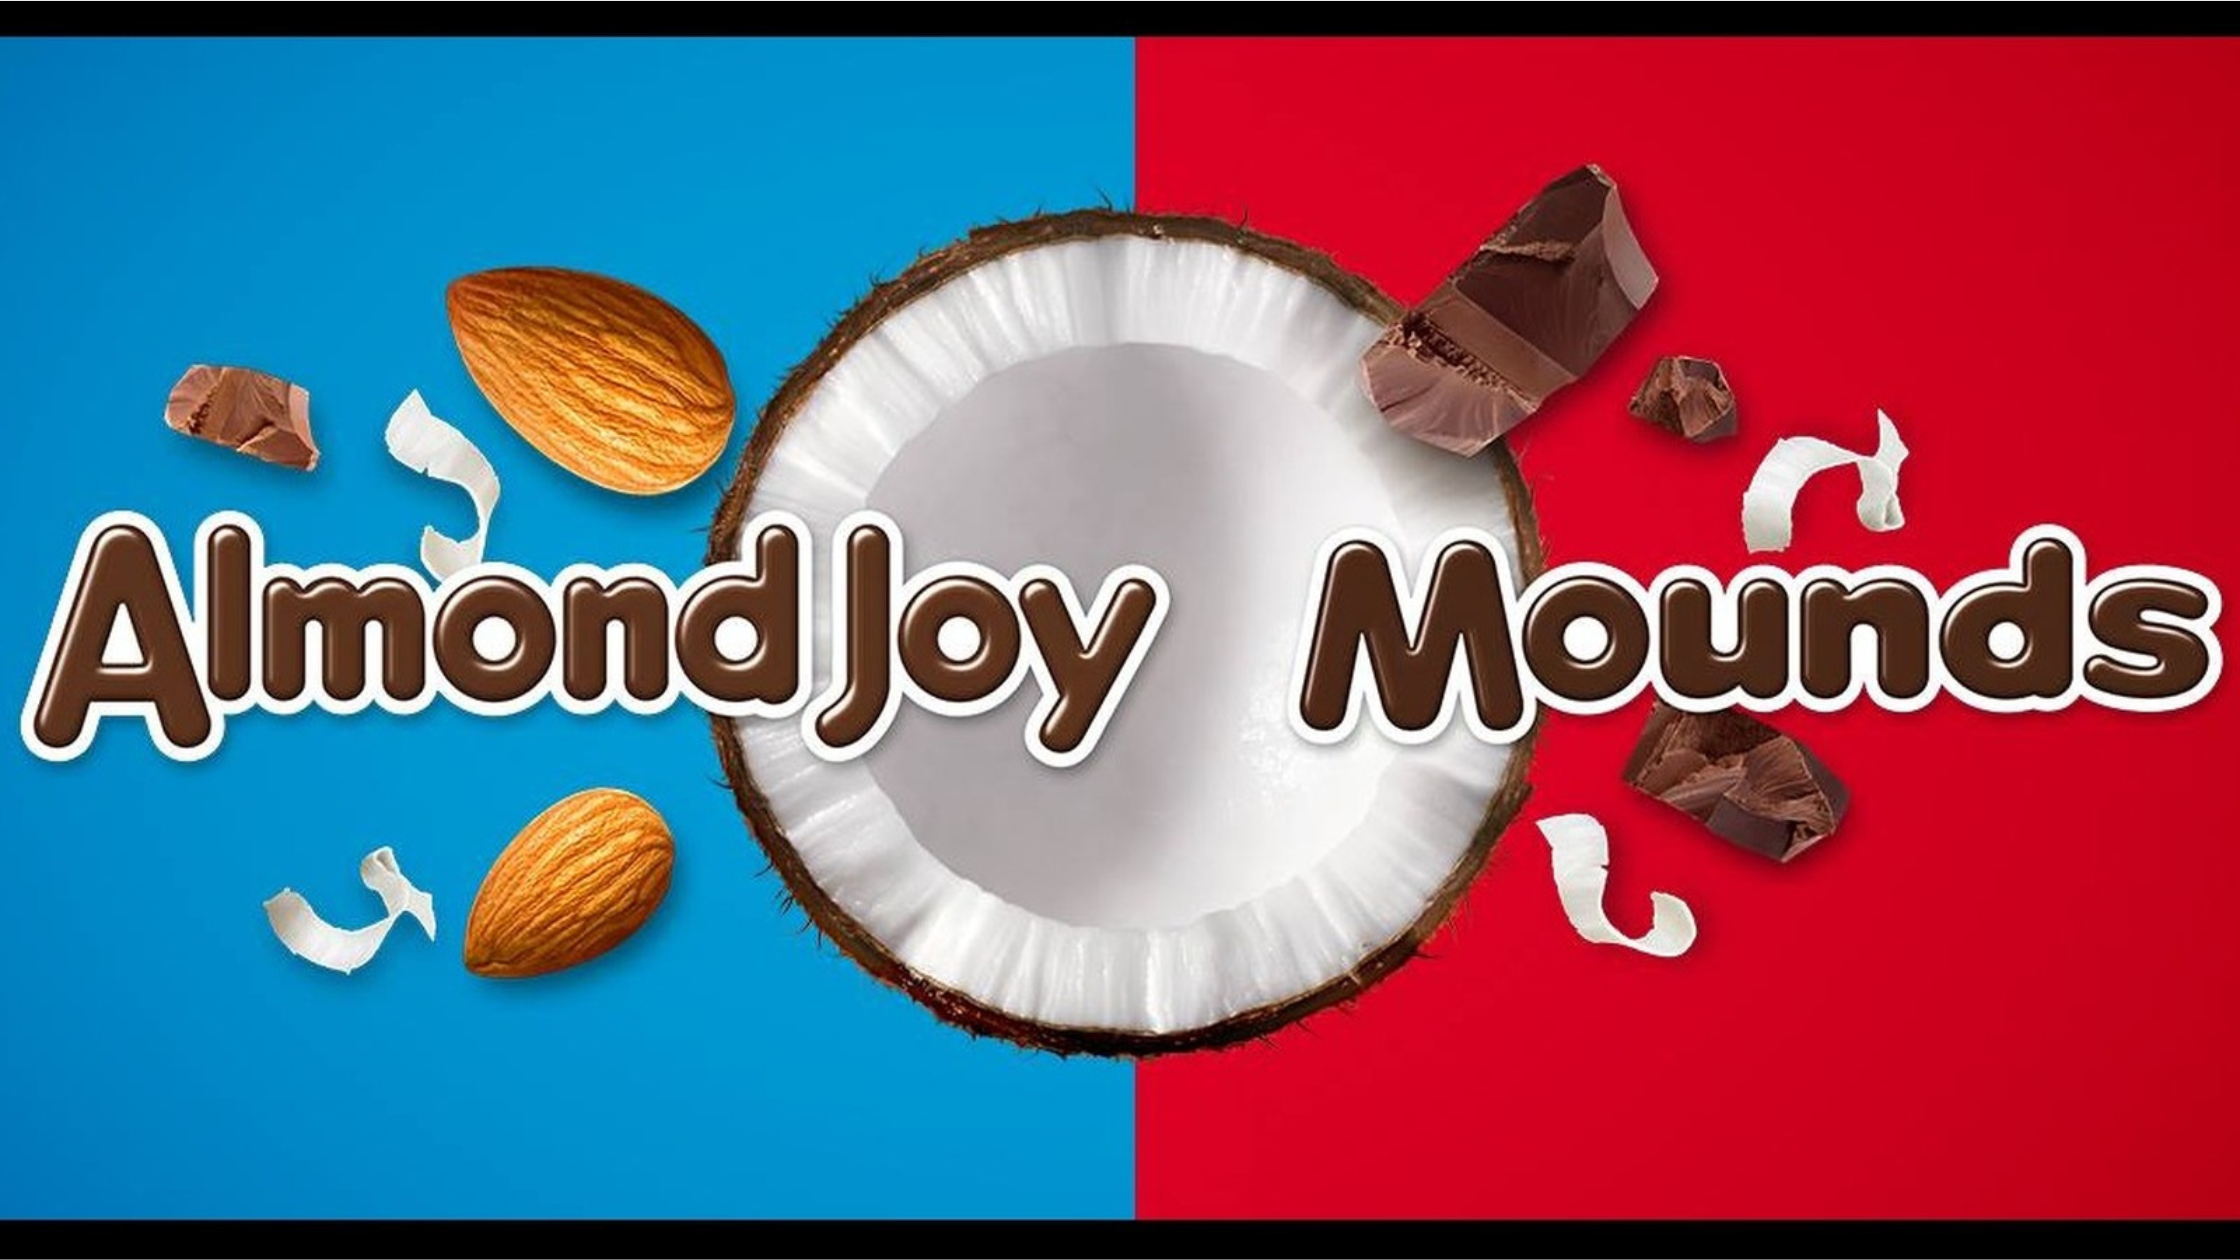 America’s Love And Passion For Almond Joy Candy Bars